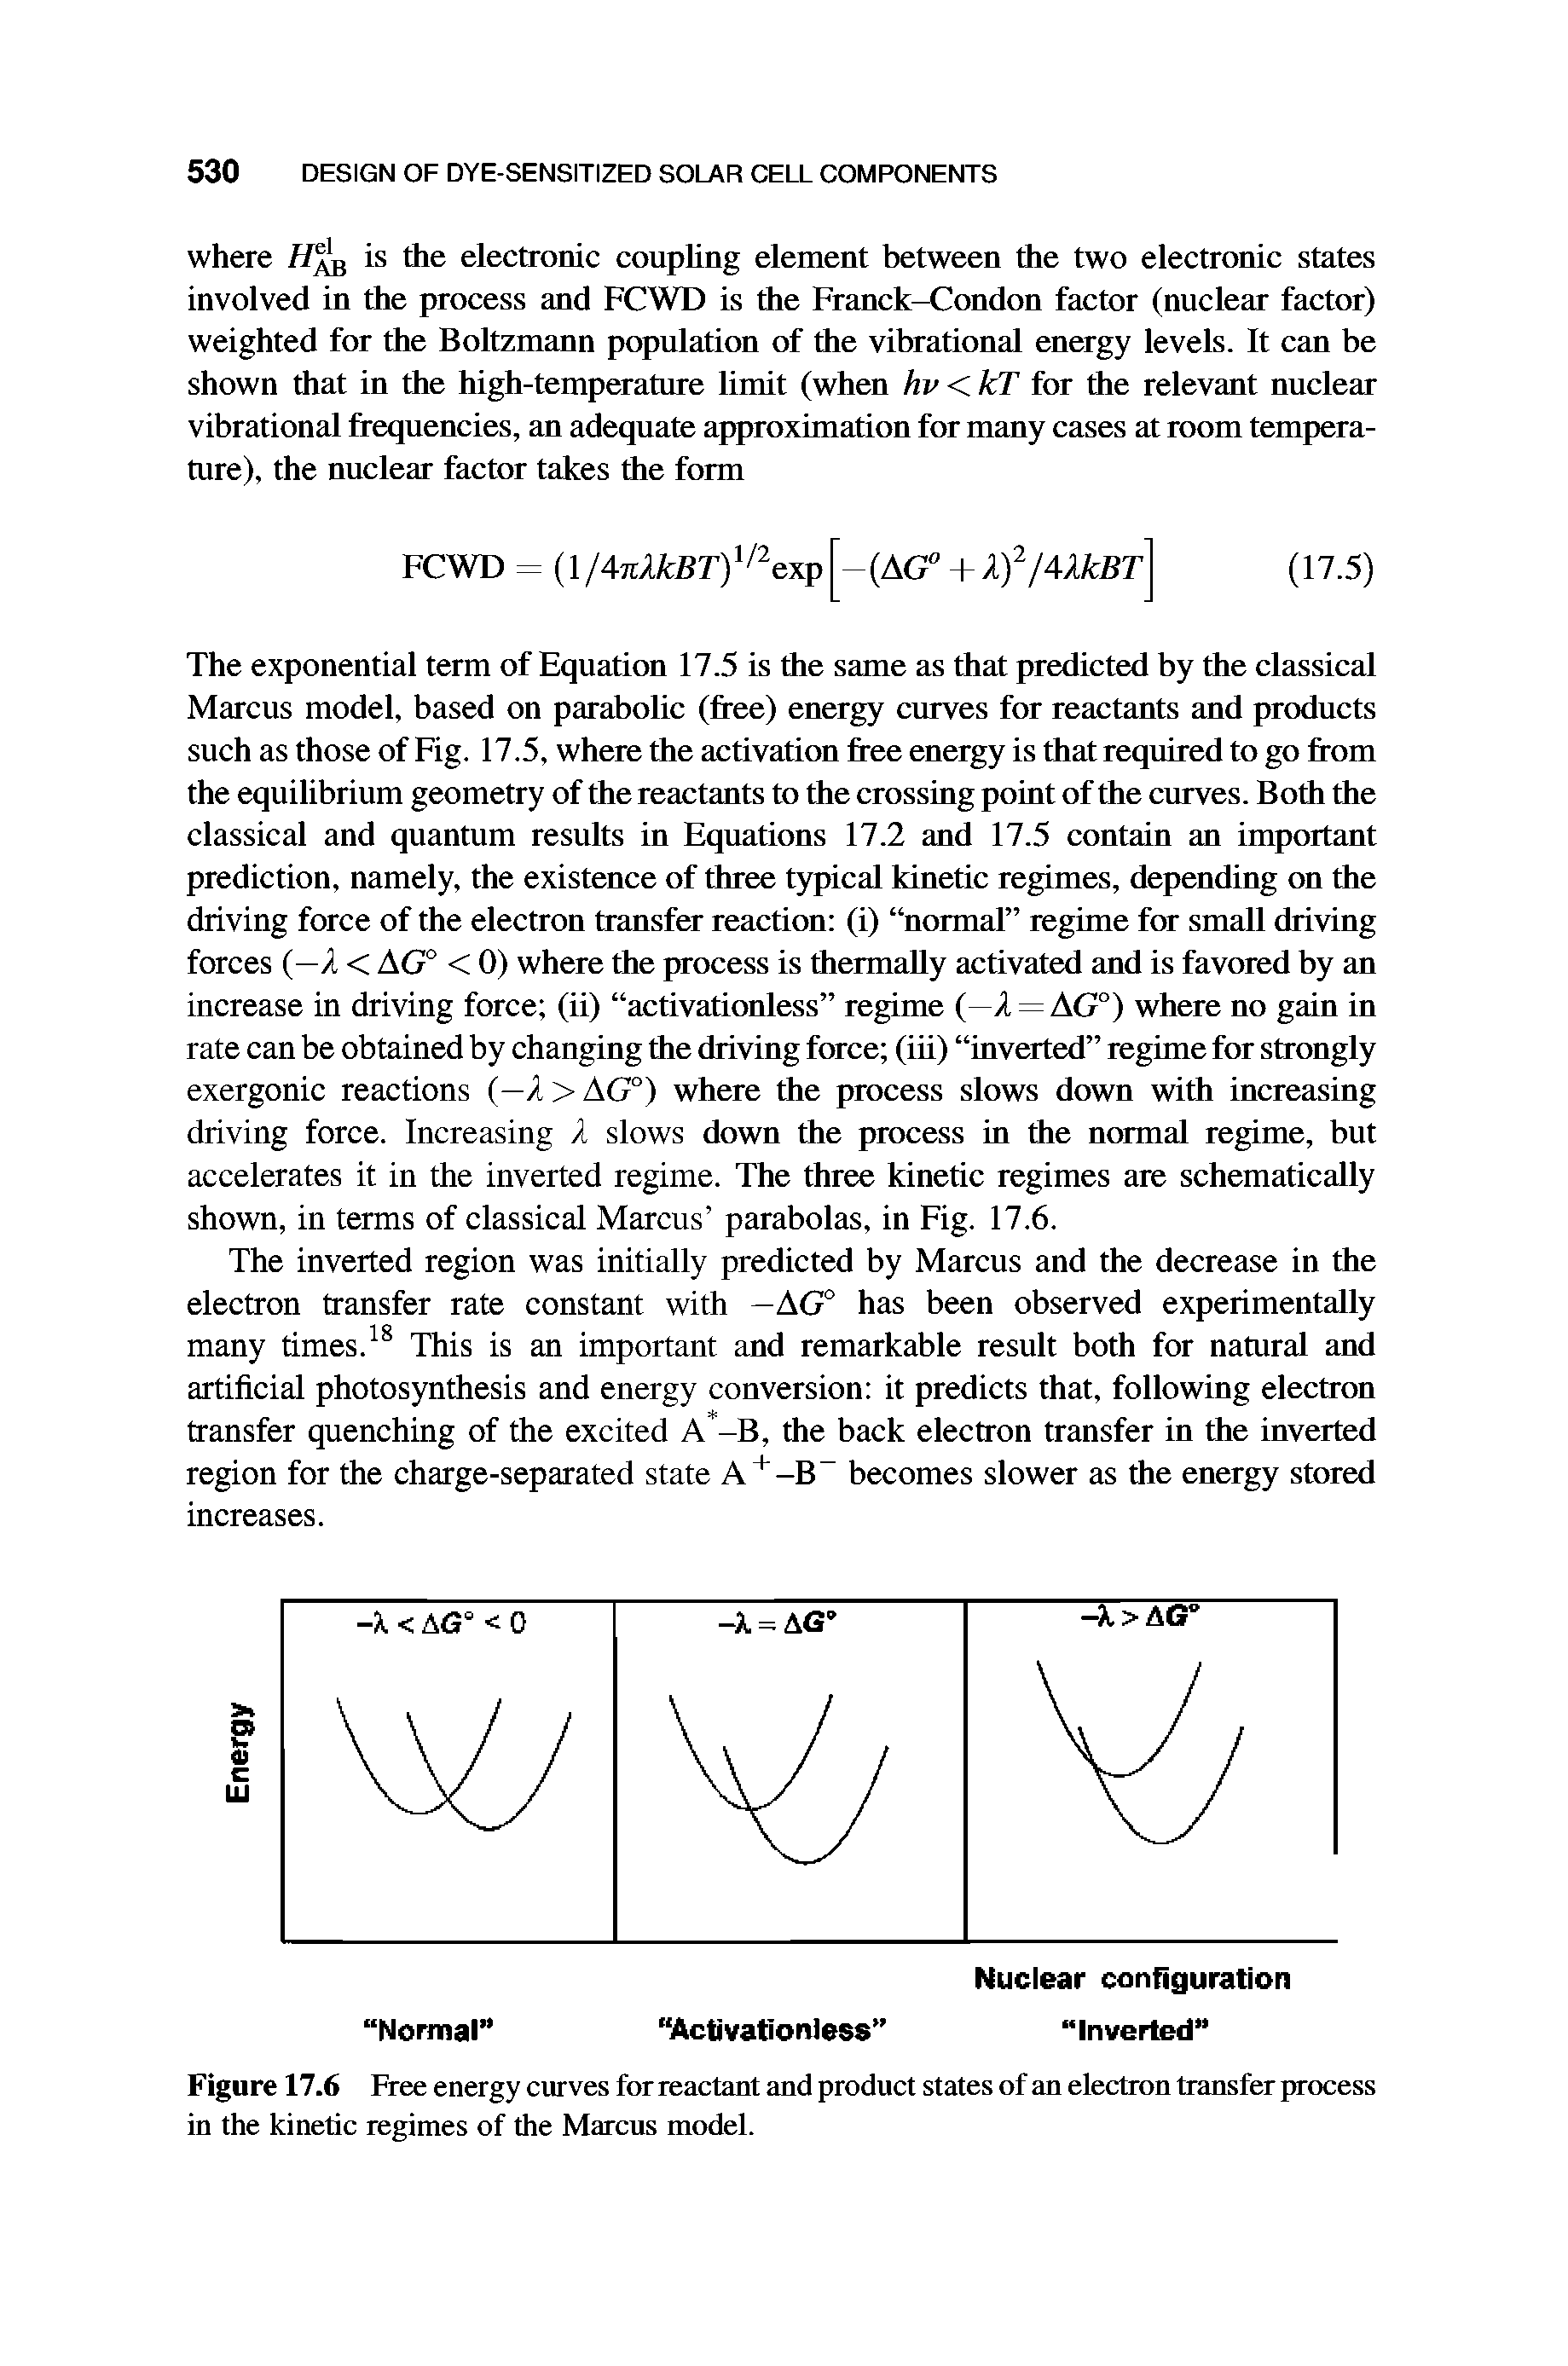 Figure 17.6 Free energy curves for reactant and product states of an electron transfer process in the kinetic regimes of the Marcus model.